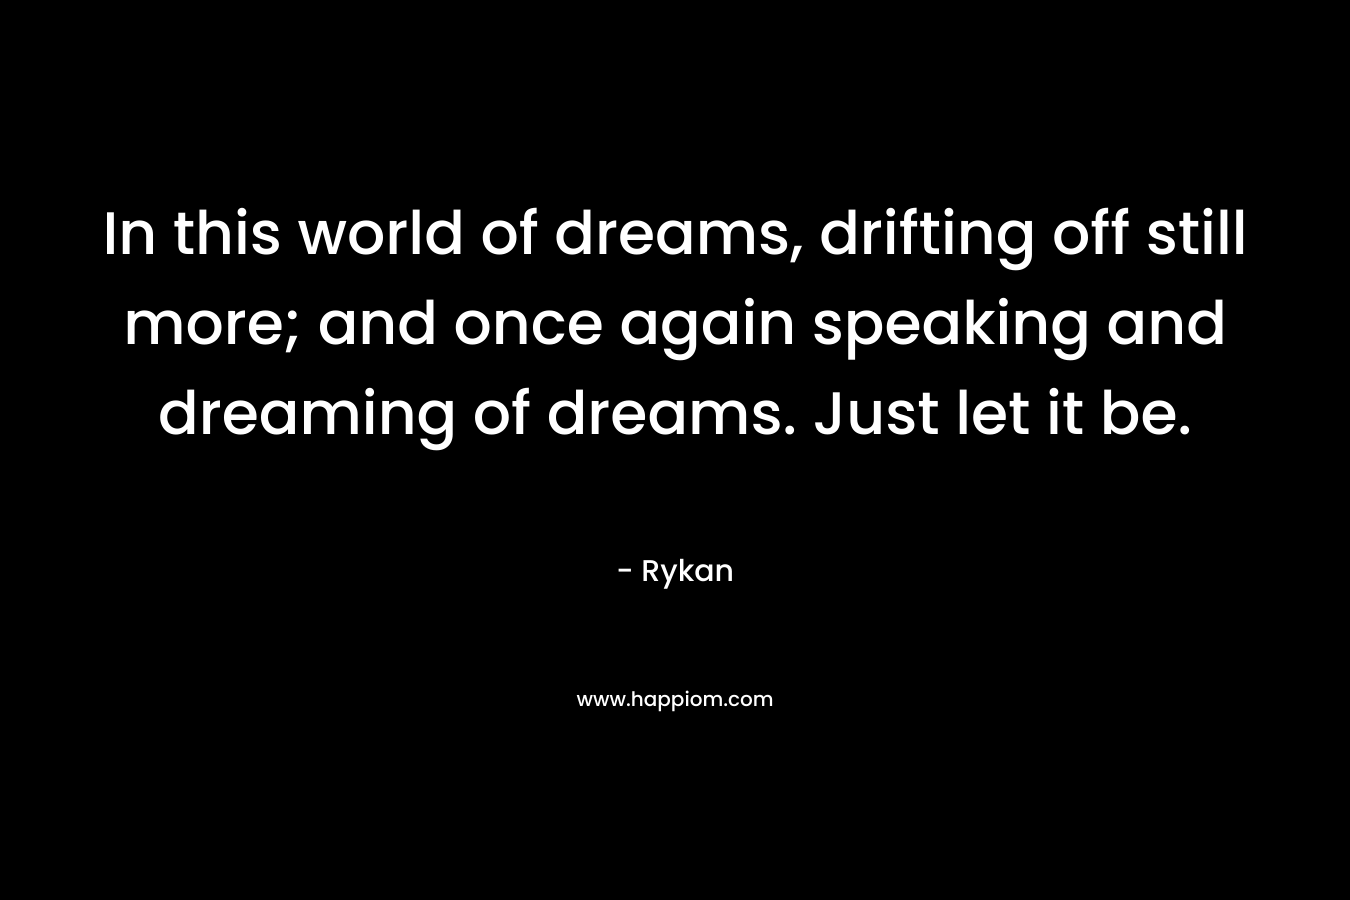 In this world of dreams, drifting off still more; and once again speaking and dreaming of dreams. Just let it be. – Rykan